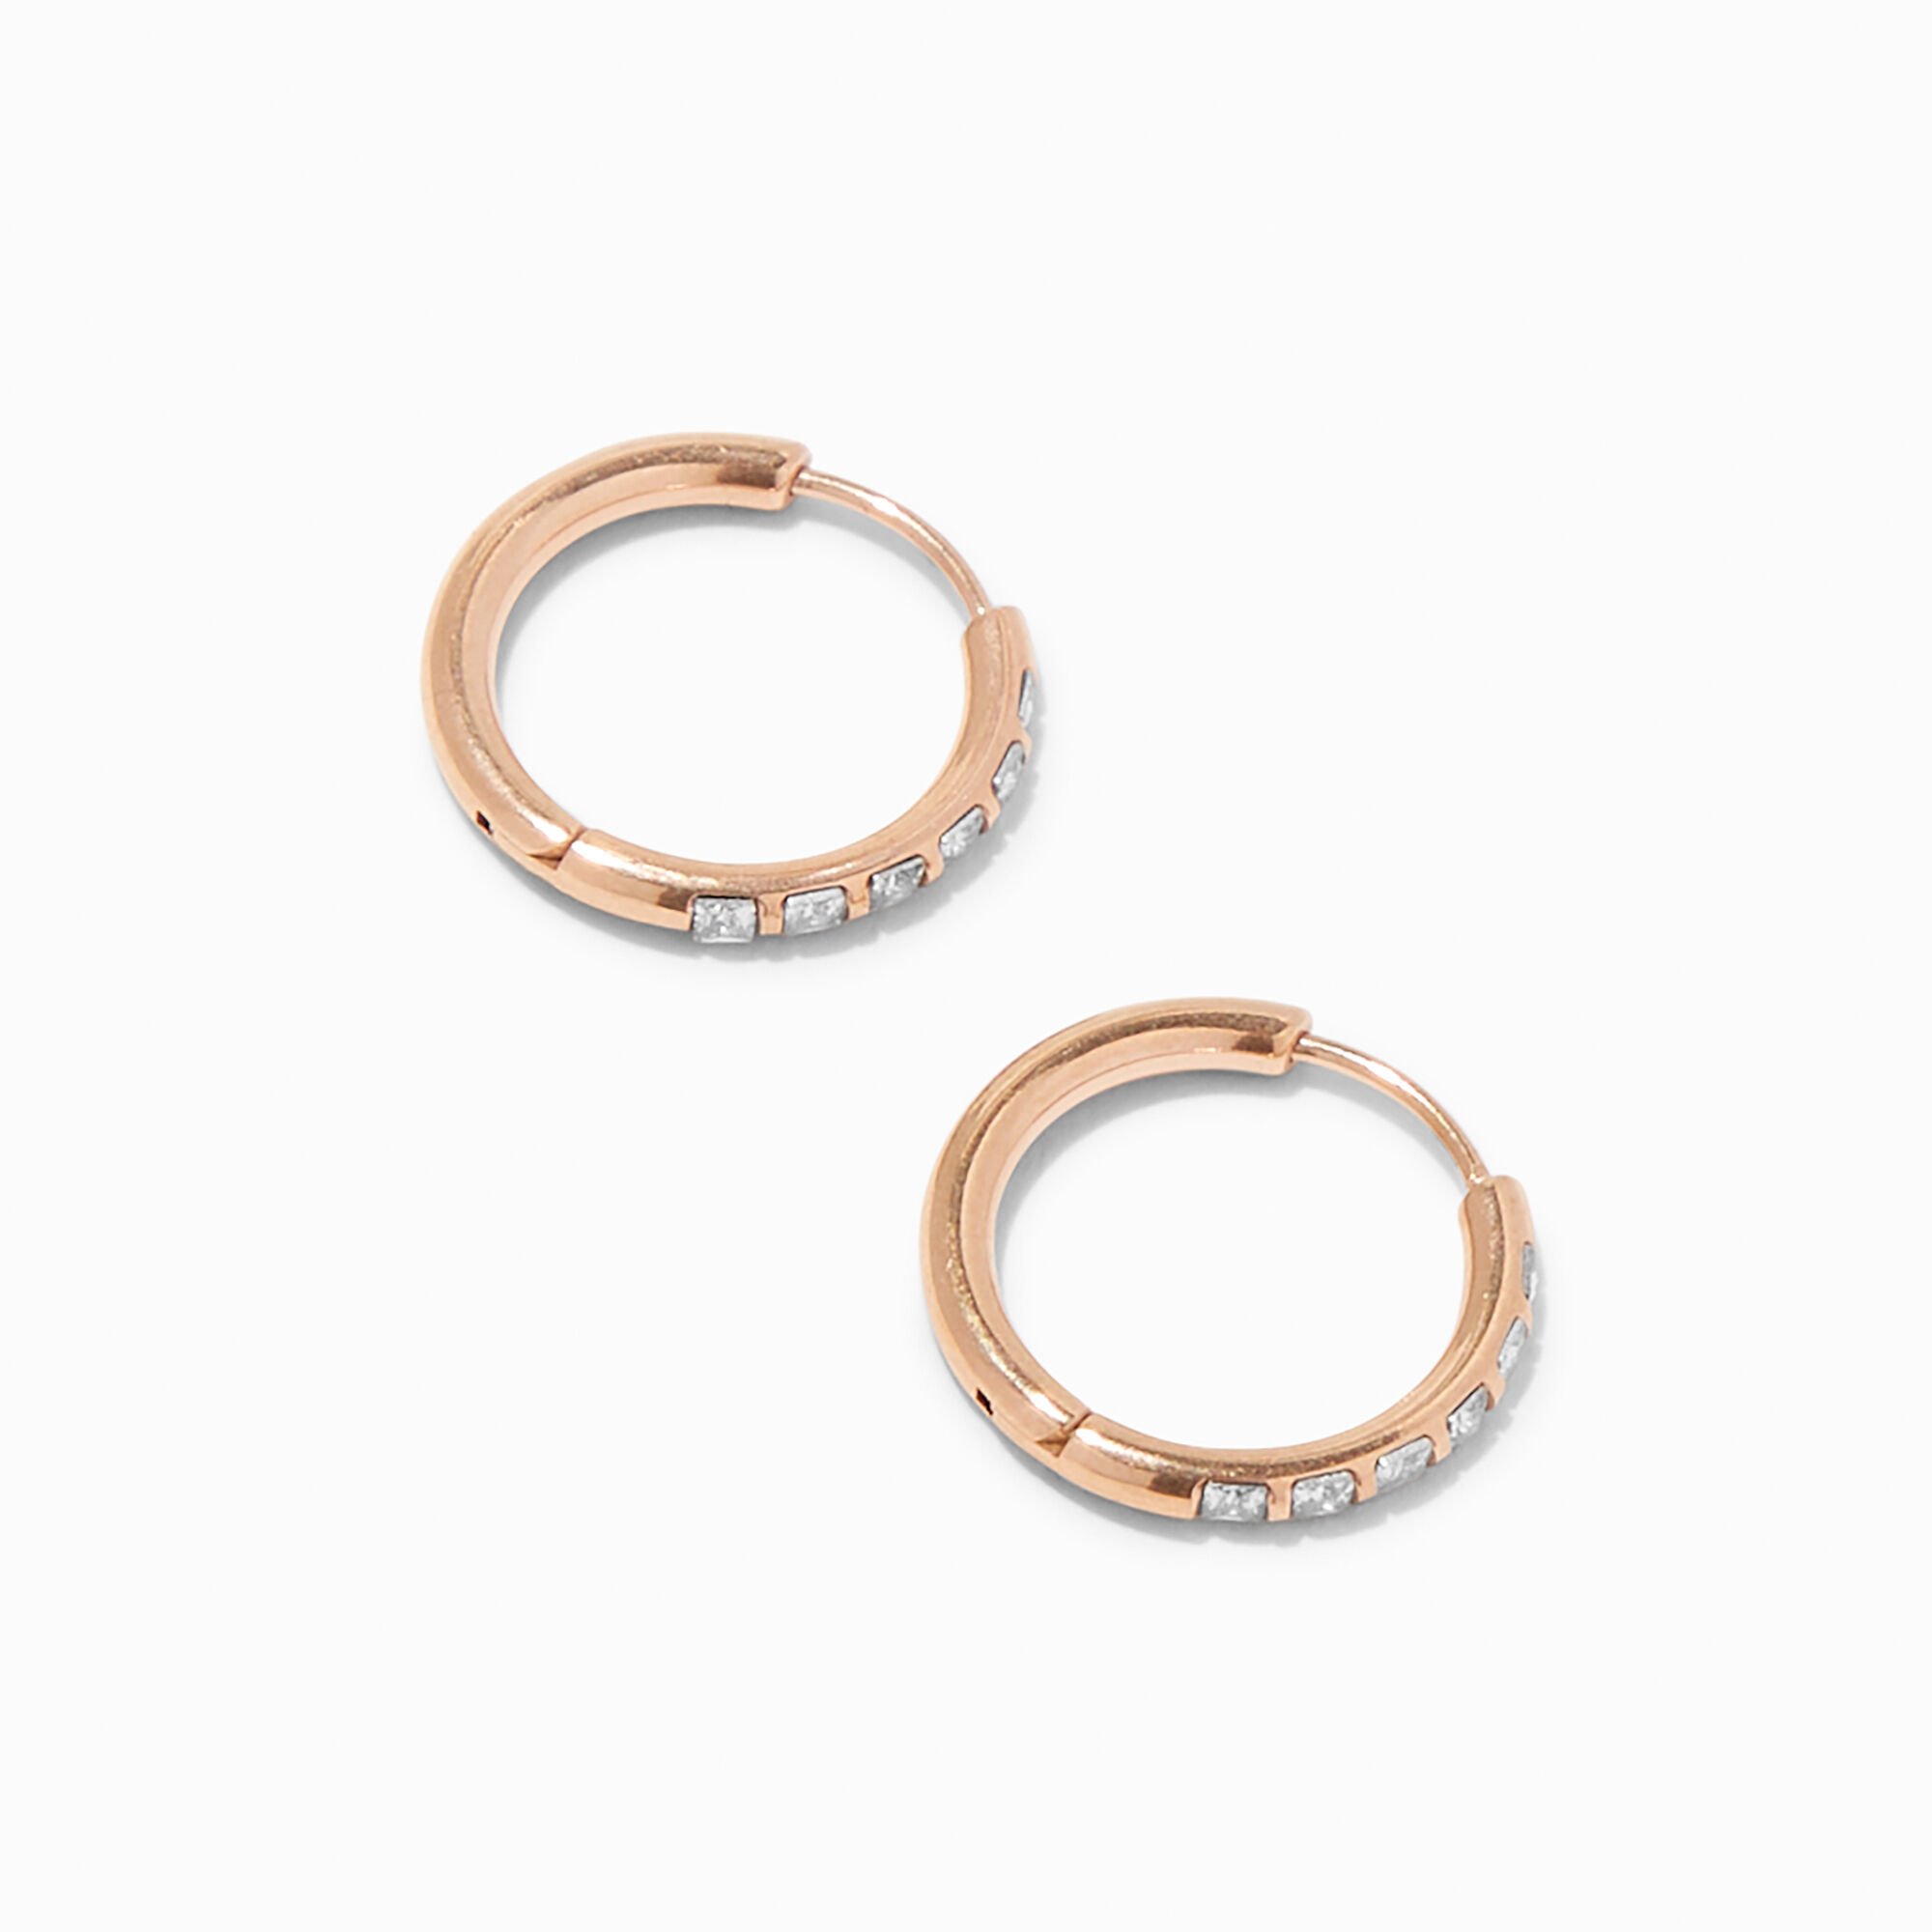 View C Luxe By Claires Rose Titanium 10MM Crystal Huggie Hoop Earrings Gold information